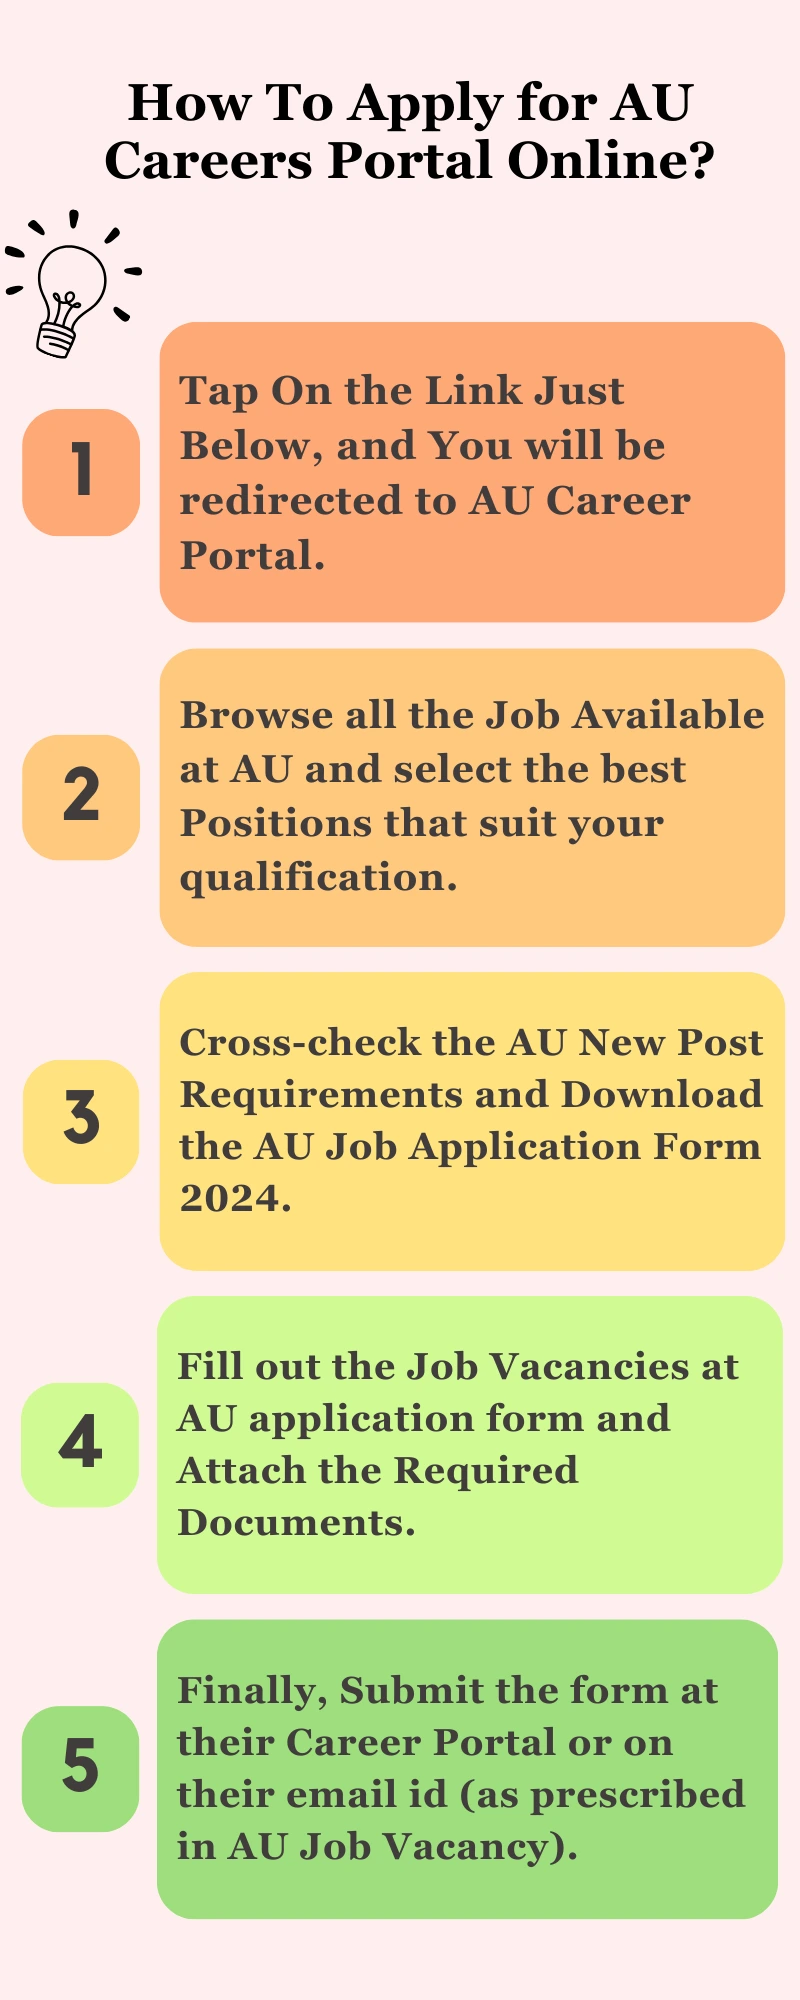 How To Apply for AU Careers Portal Online?